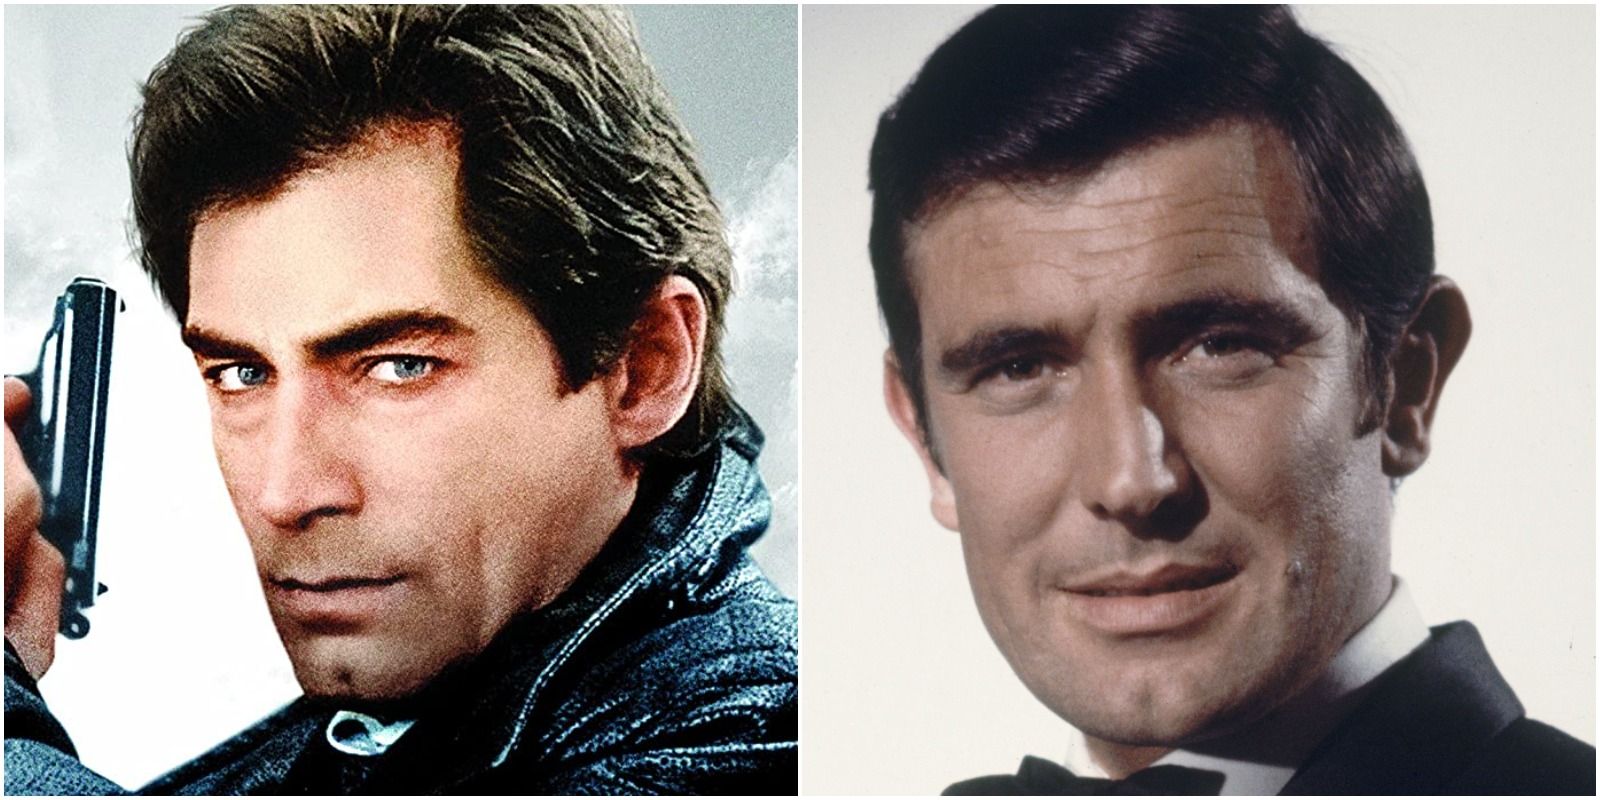 5 Reasons Why Timothy Dalton Is Underrated 5 Reasons Why George Lazenby Is Underrated Featured Image